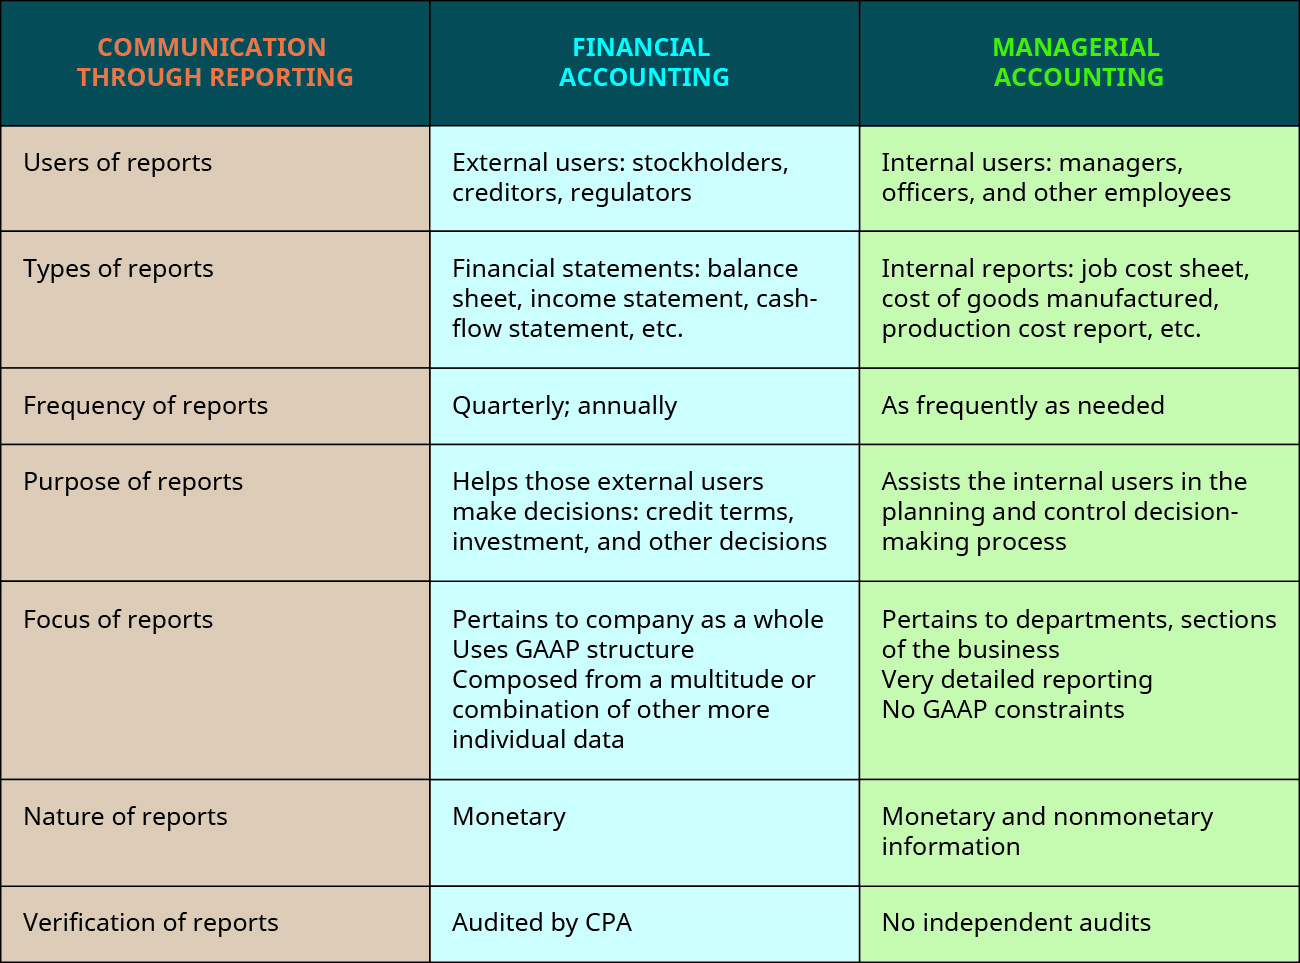 Chart with columns headed: Communication through Reporting; Financial Accounting; and Managerial Accounting (respectively): Users of reports; Primarily external users: stockholders, creditors, regulators; Internal users: mangers, officers, and other employees. Types of reports; Financial statements: balance sheet, income statement, cash-flow statement, etc.; Internal reports: job cost sheet, cost of goods manufactured, production cost report, etc. Frequency of reports; Quarterly, annually; As frequently as needed. Purpose of reports; Helps those external users make decisions: credit terms, investment, and other decisions; Assists the internal users in the planning and control decision-making process. Focus of reports; Pertains to company as a whole, Uses G A A P structure, Composed from a multitude or combination of other more individual data; Pertains to departments or sections of the business, Very detailed reporting, No G A A P constraints. Nature of reports; Monetary; Monetary and nonmonetary information. Verification of reports; Audited by C P A; No independent audits.